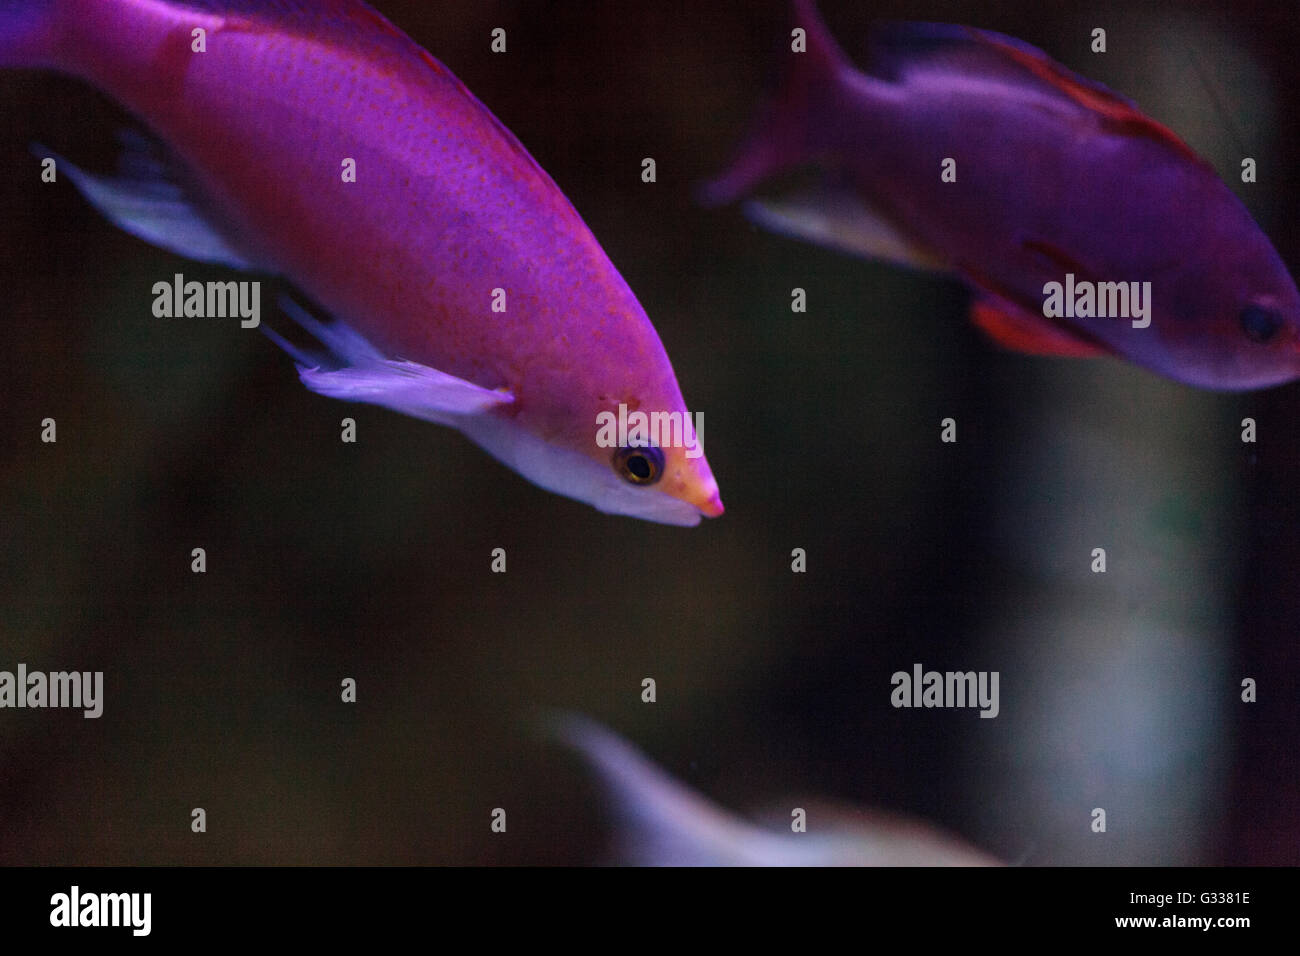 Pink Bicolor anthias fish Pseudanthias bicolor swims over a coral reef in the ocean. Stock Photo